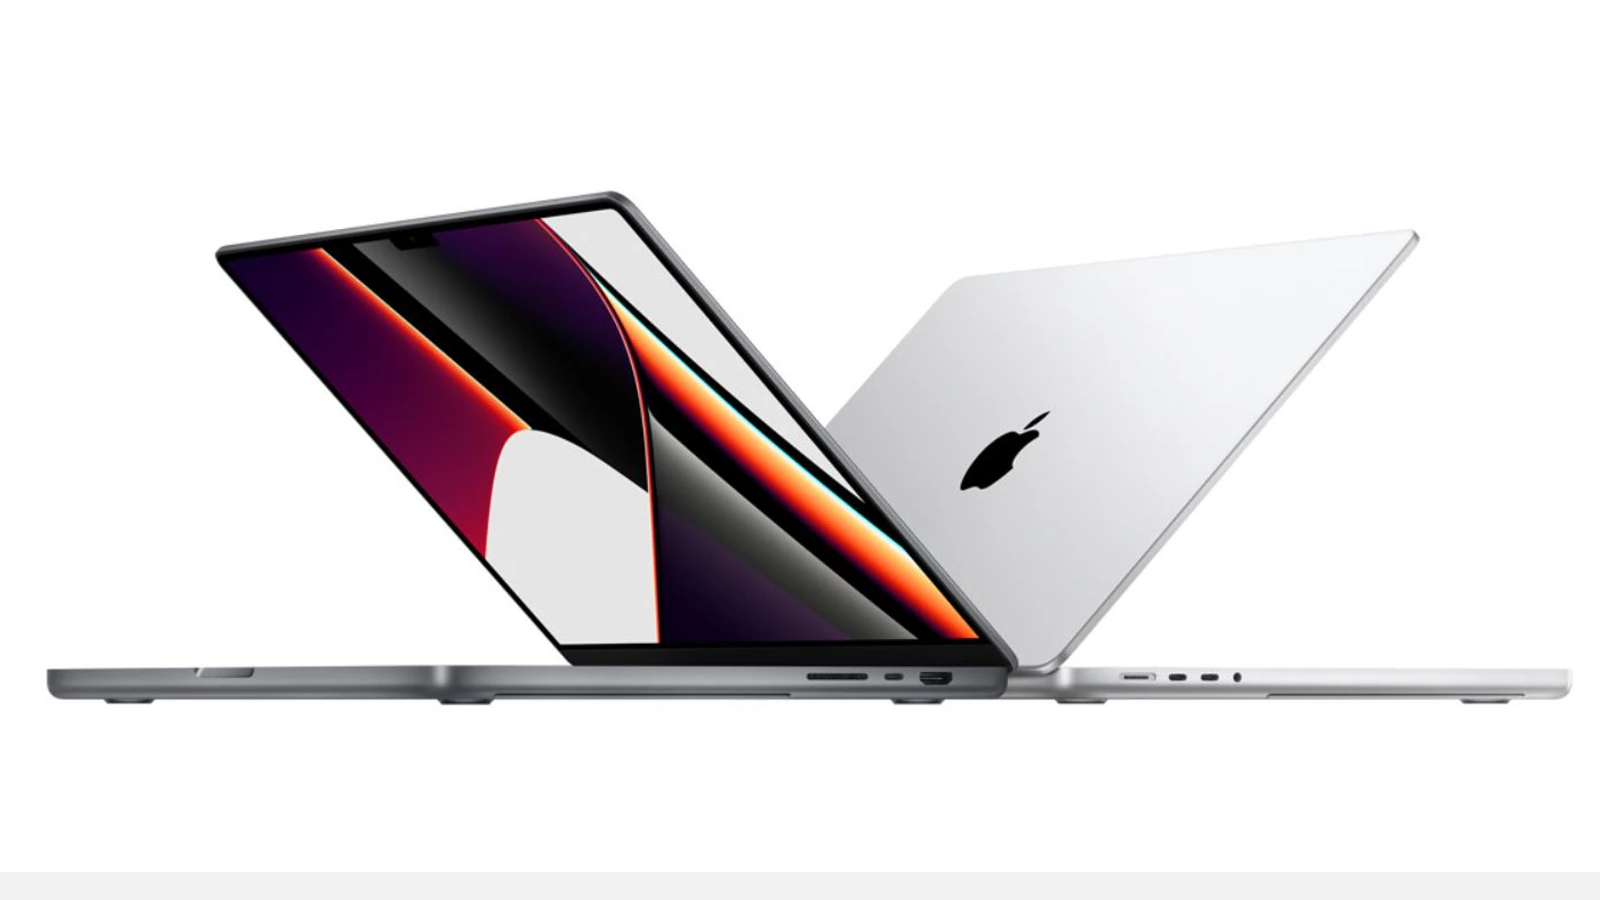 Is Your Next MacBook Going to Bend? Apple Plans Foldable Laptops for 2026 Launch